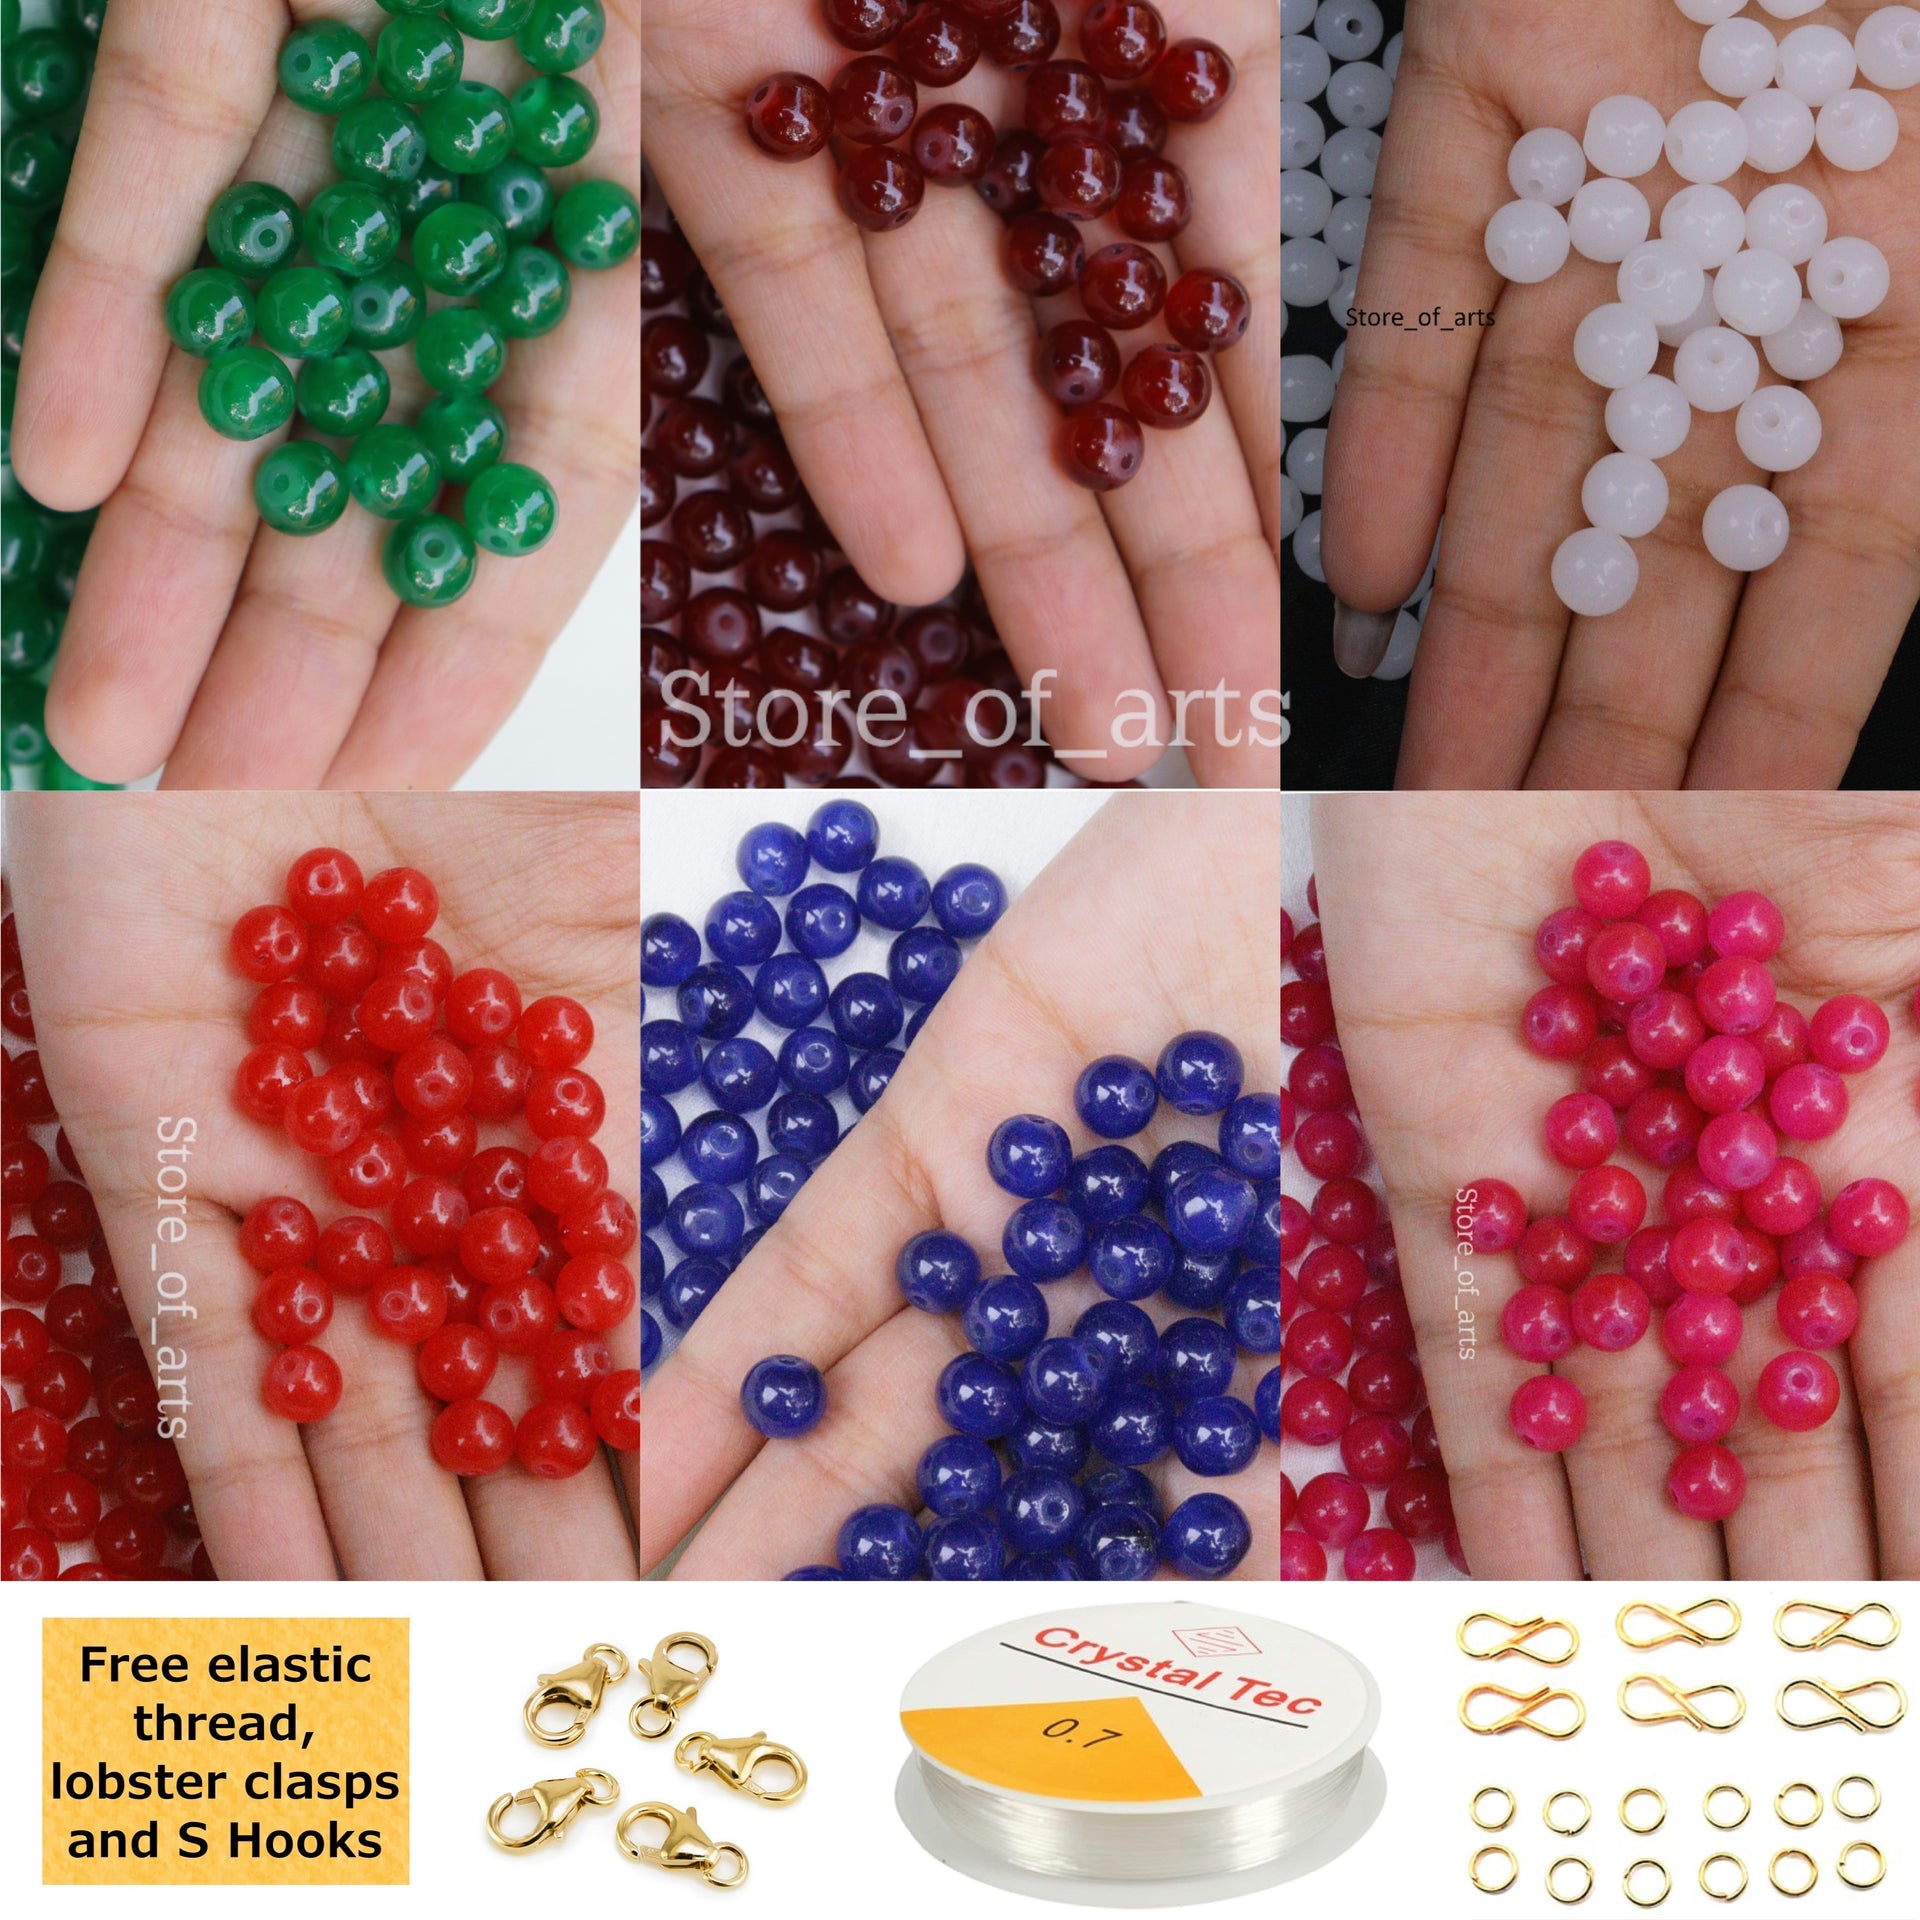 14400pcs Multicolor 3mm Glass Seed Beads Small Craft Beads With Lobster  Clasps, Open Jump Rings And Elastic Crystal String For Bracelet Making